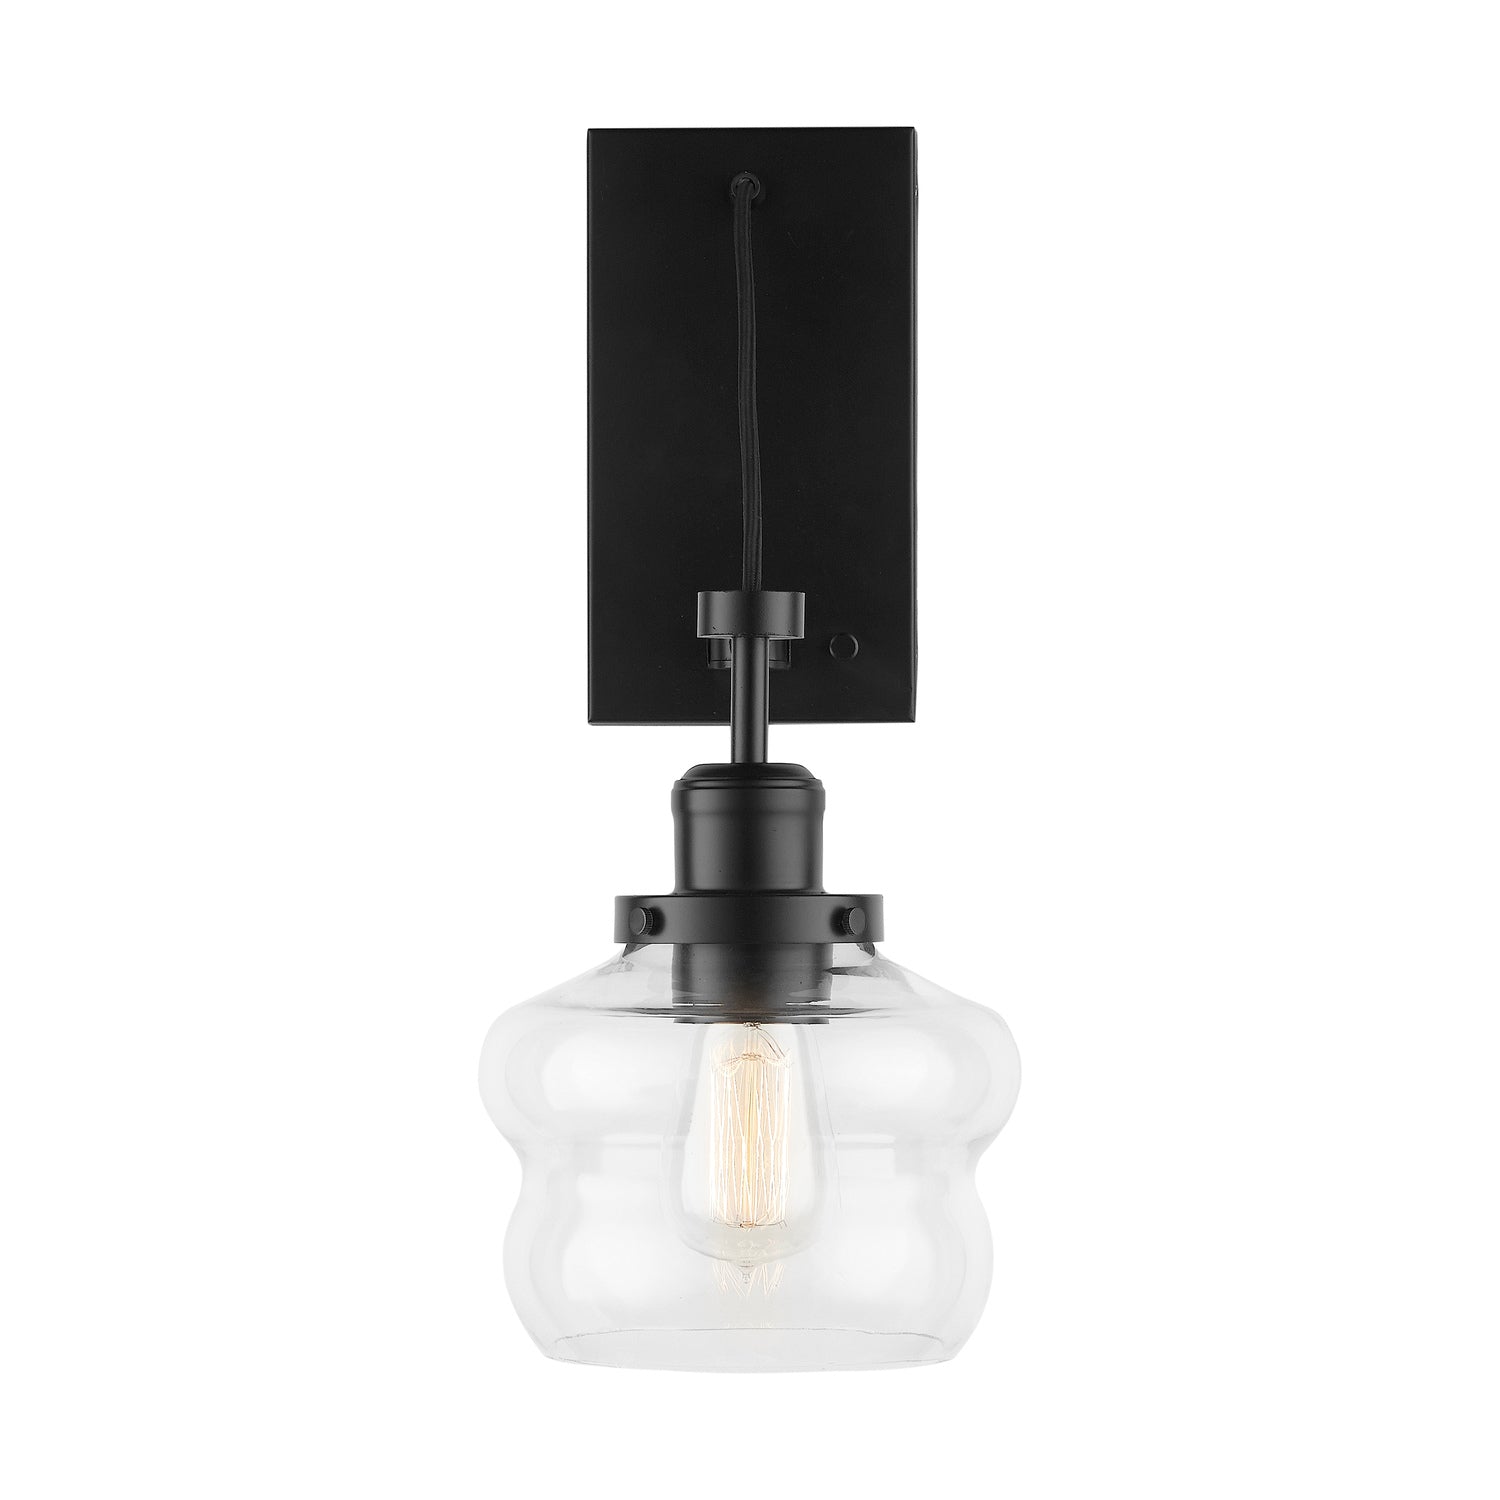 Rhodes Wall Sconce